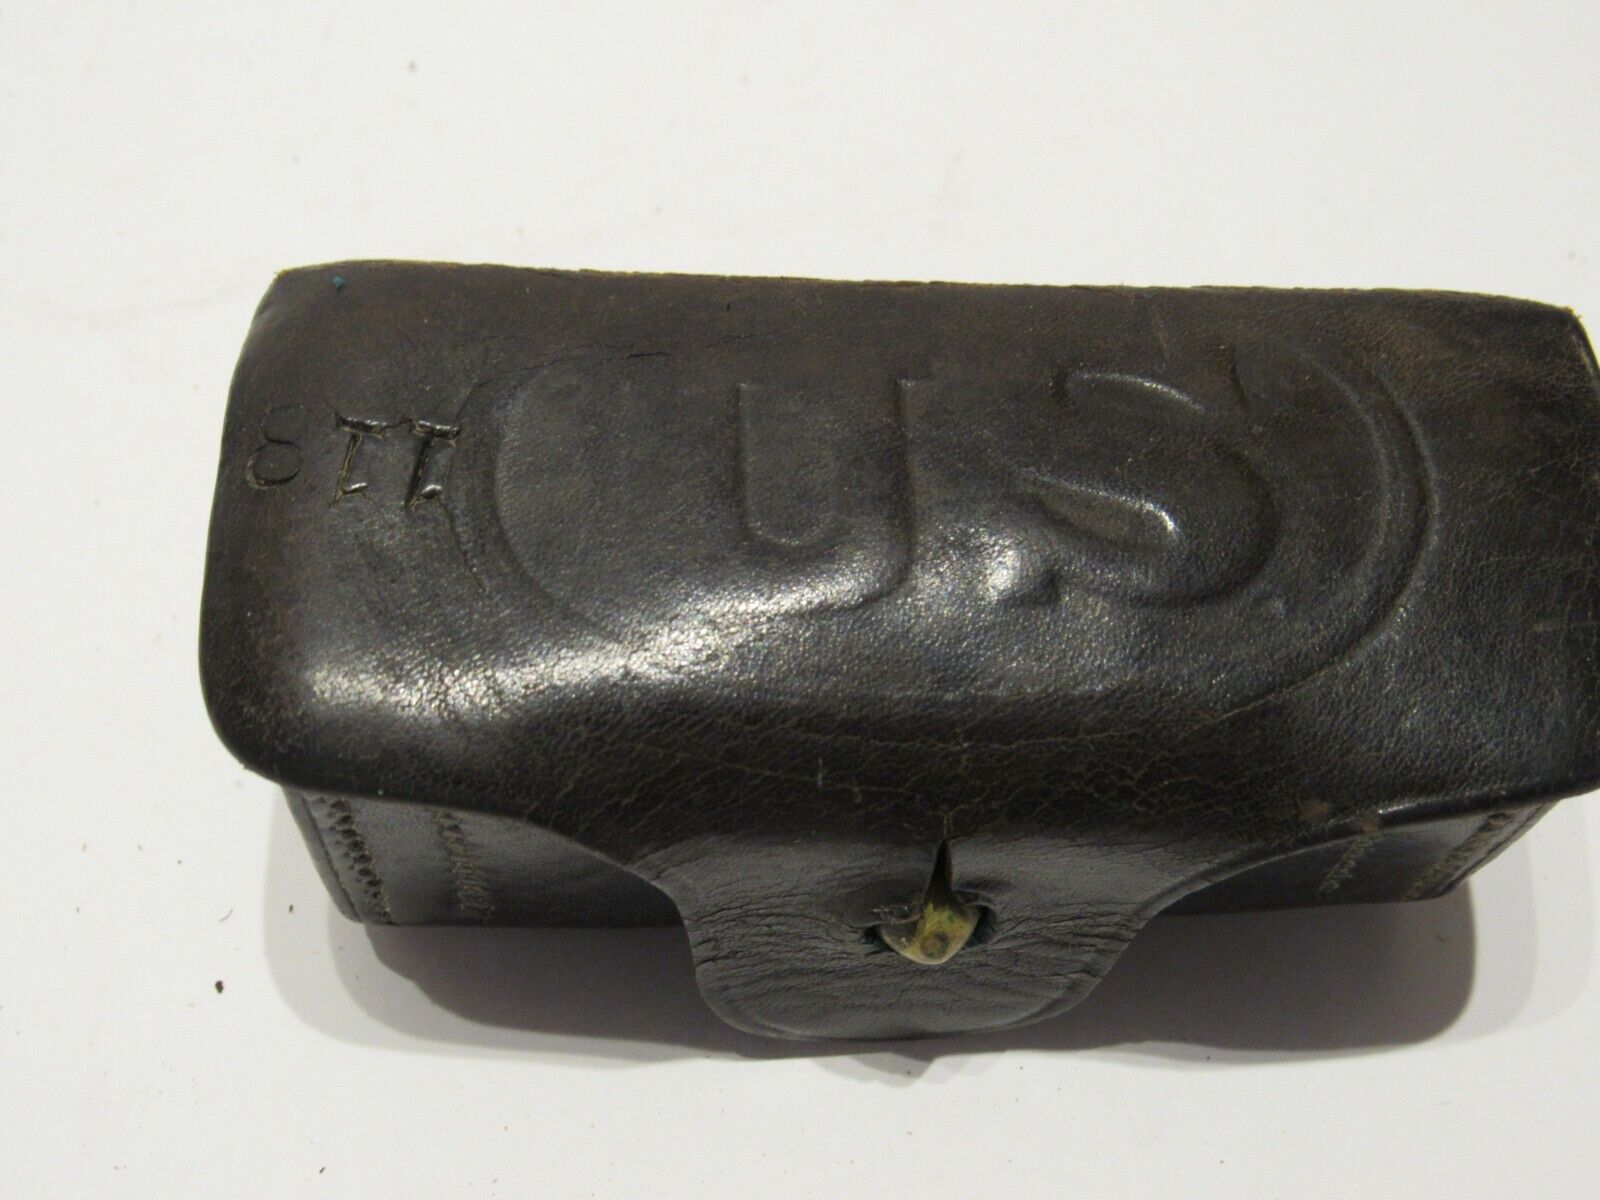 Original US Army 1906 Pattern Leather .38 Pistol Cartridge Pouch  RIA